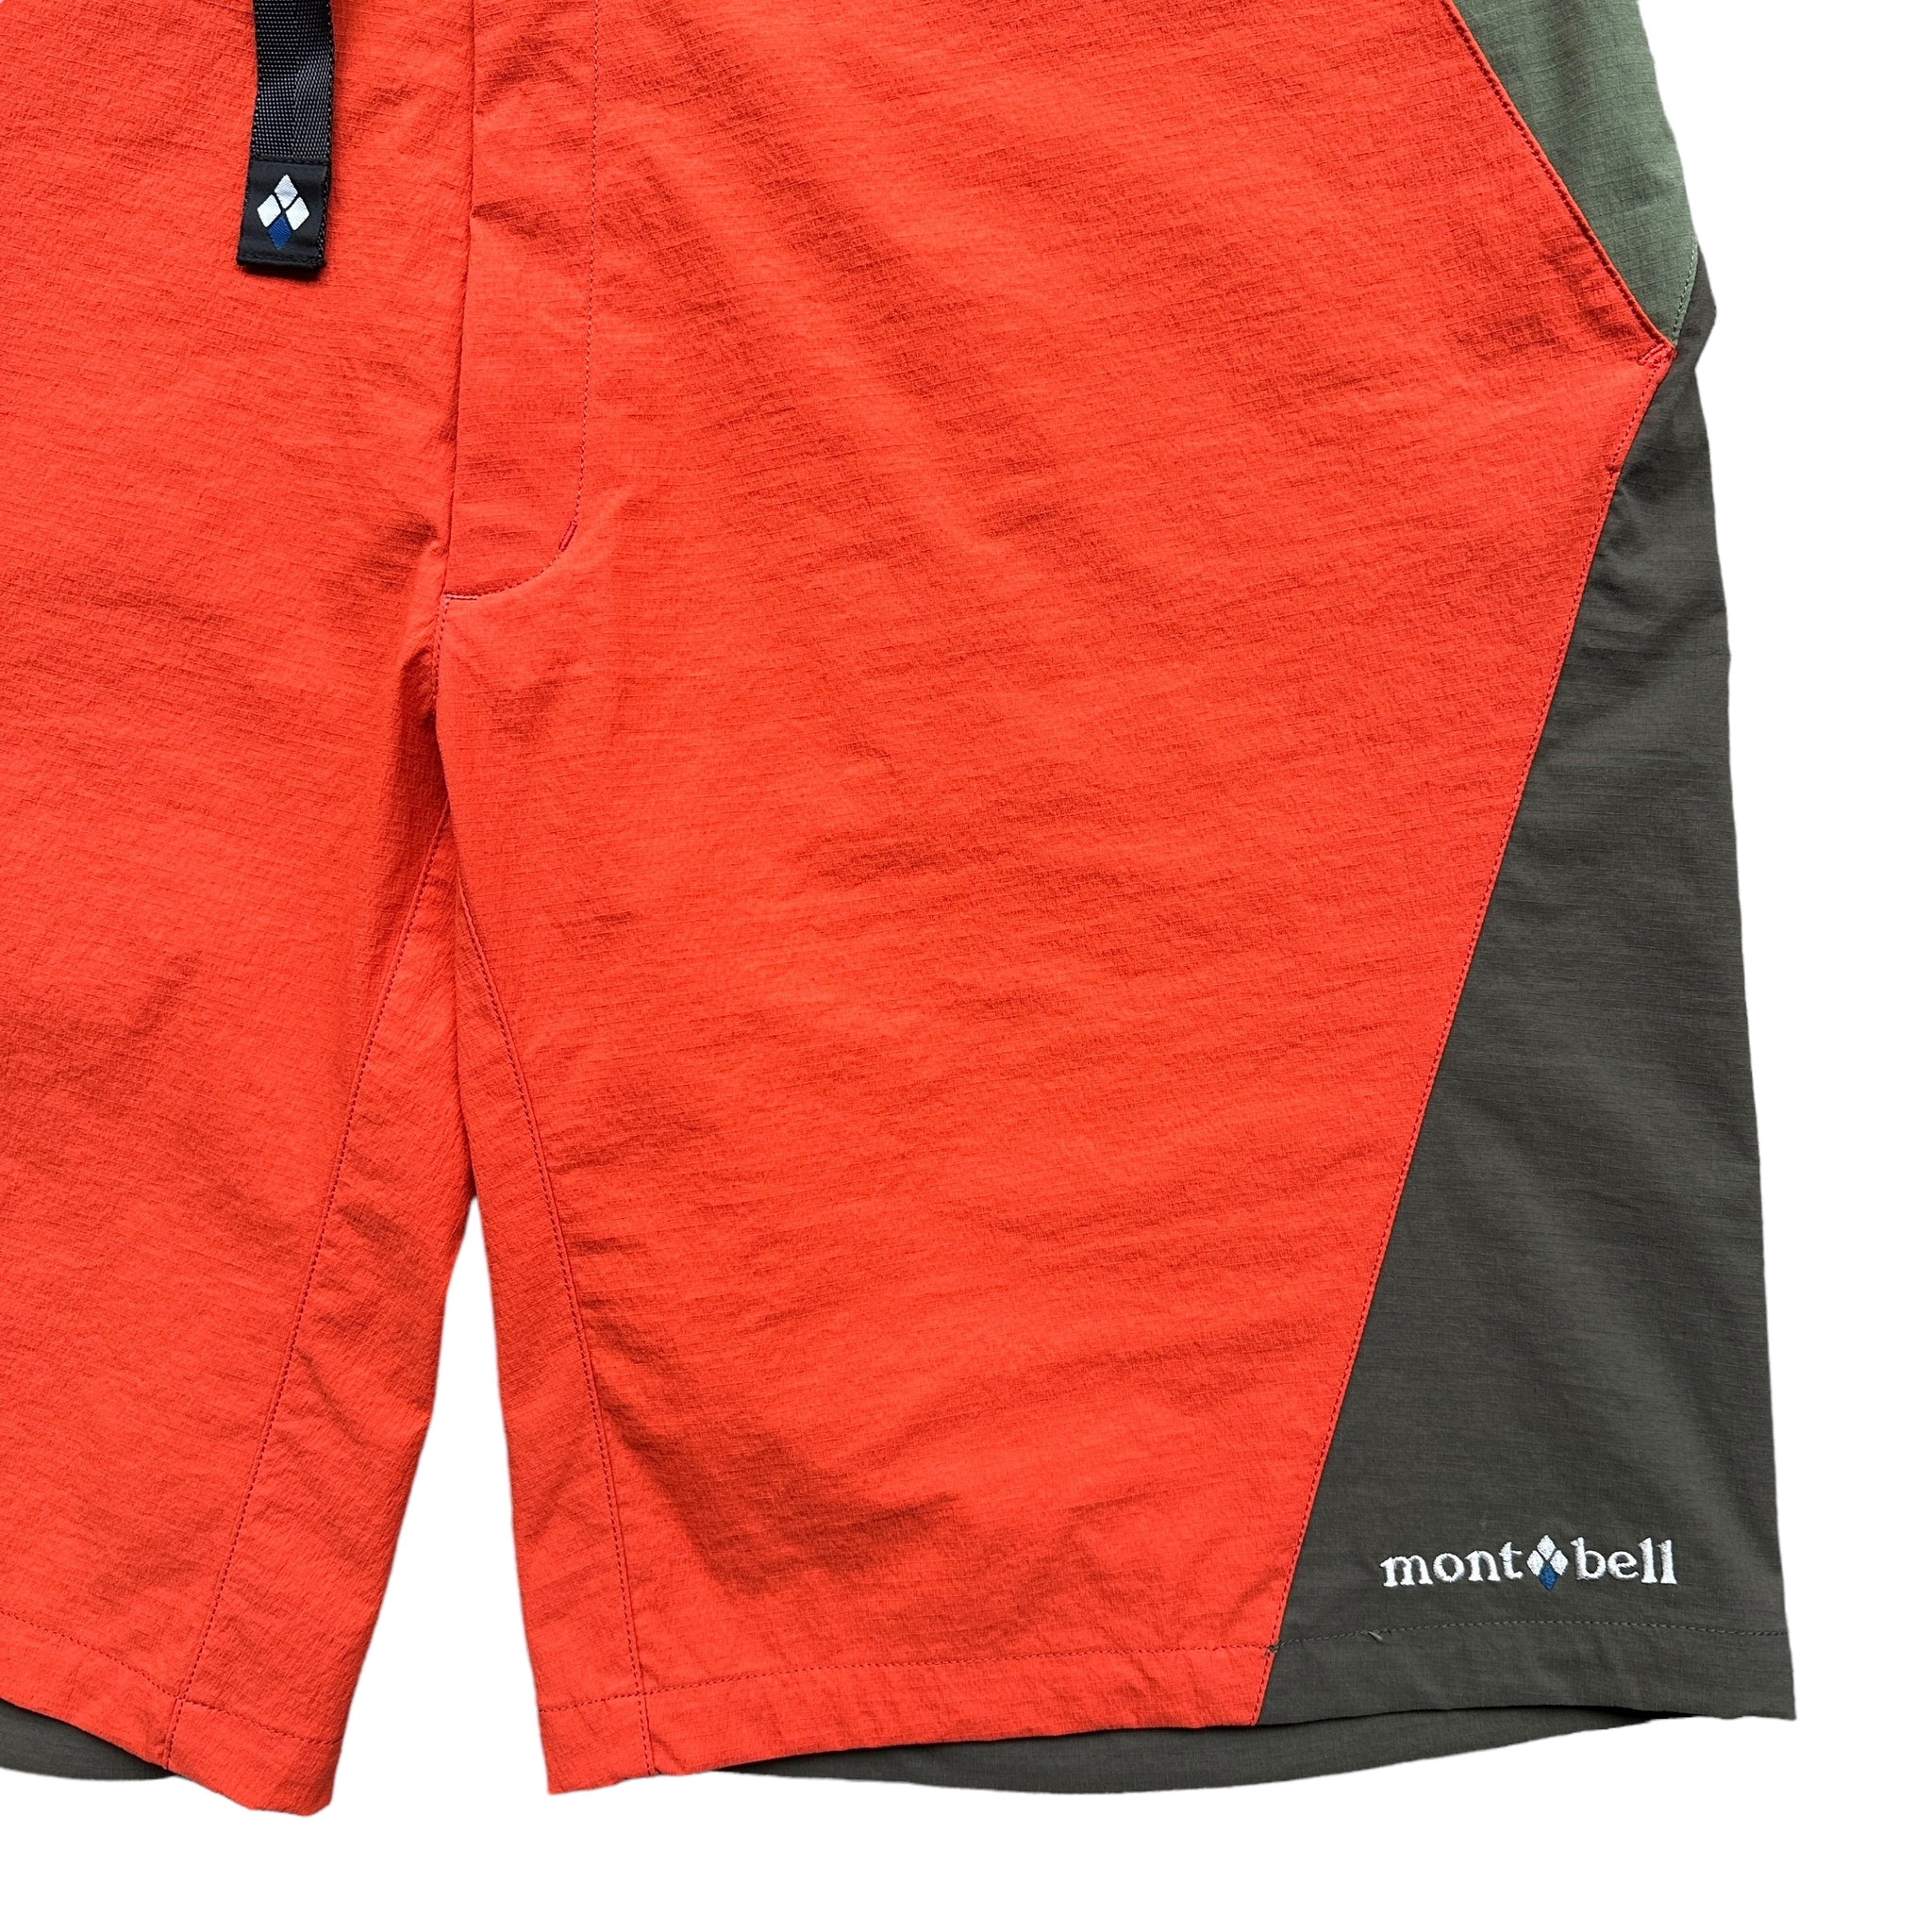 Montbell shorts XL